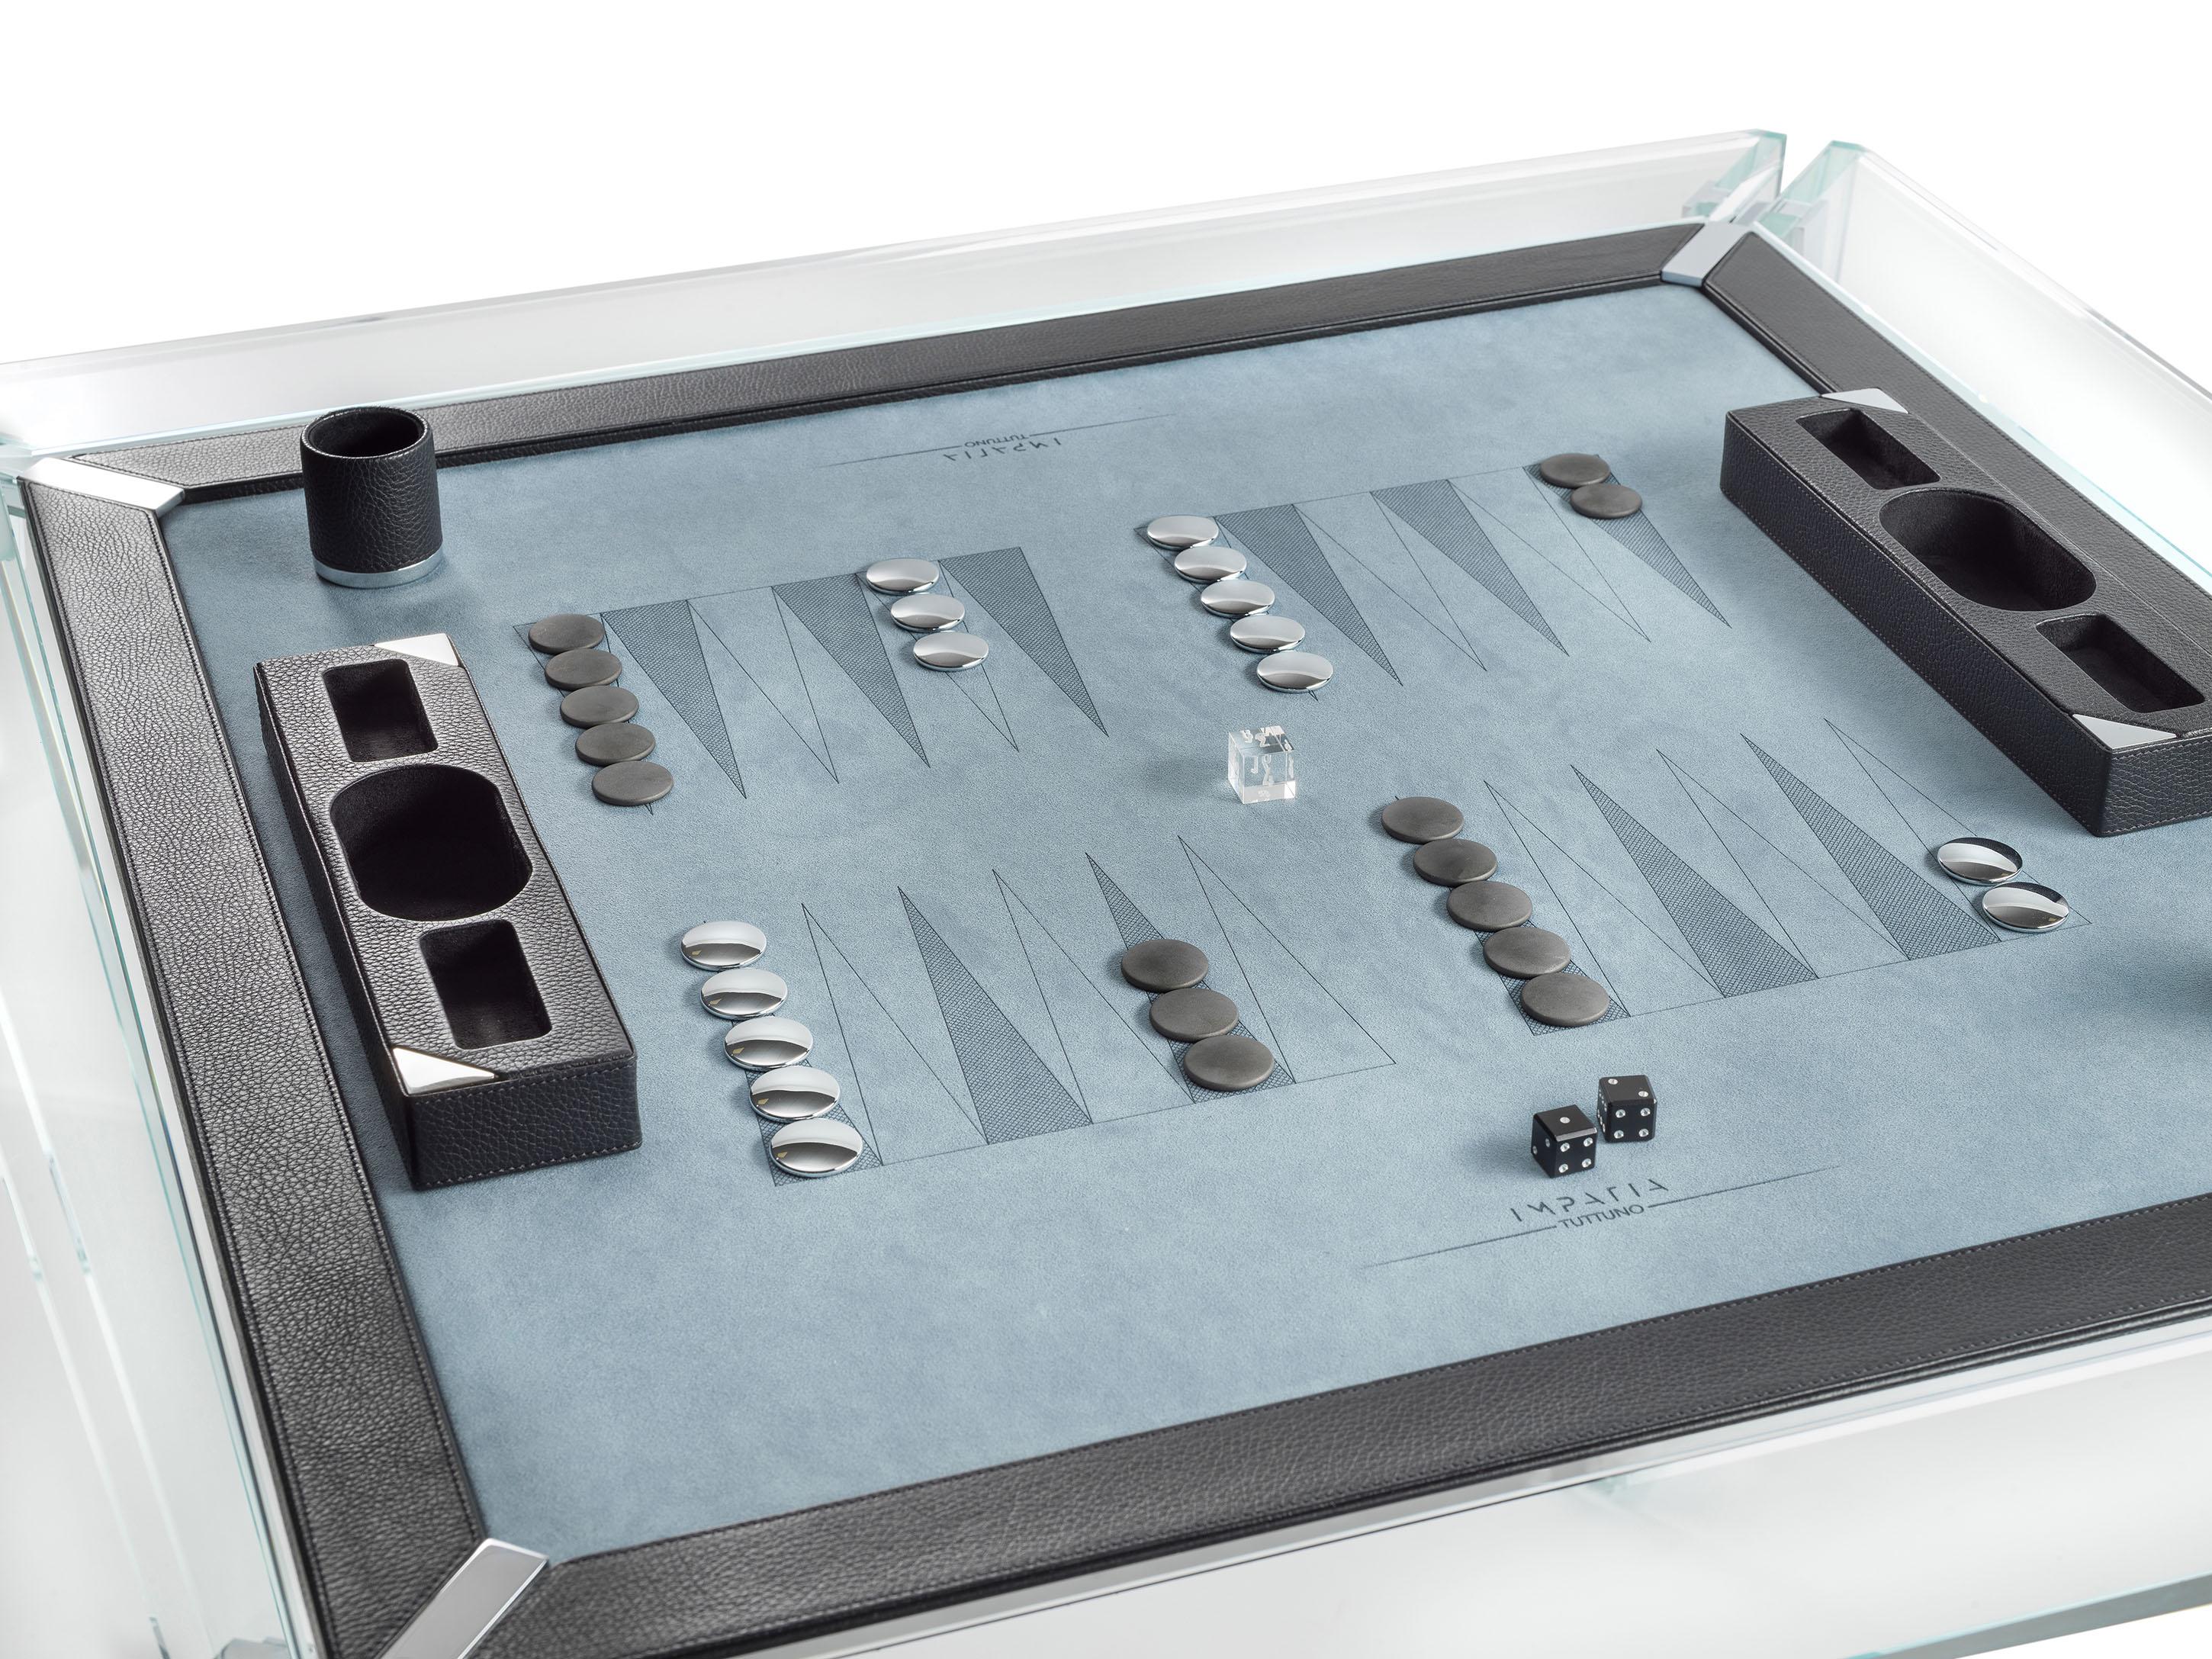 The Tuttuno leather edition backgammon game table is designed to accommodate two players with a built-in backgammon playing surface. The minimalistic design gives off the unique impression that the table is floating.

This Tuttuno table features a